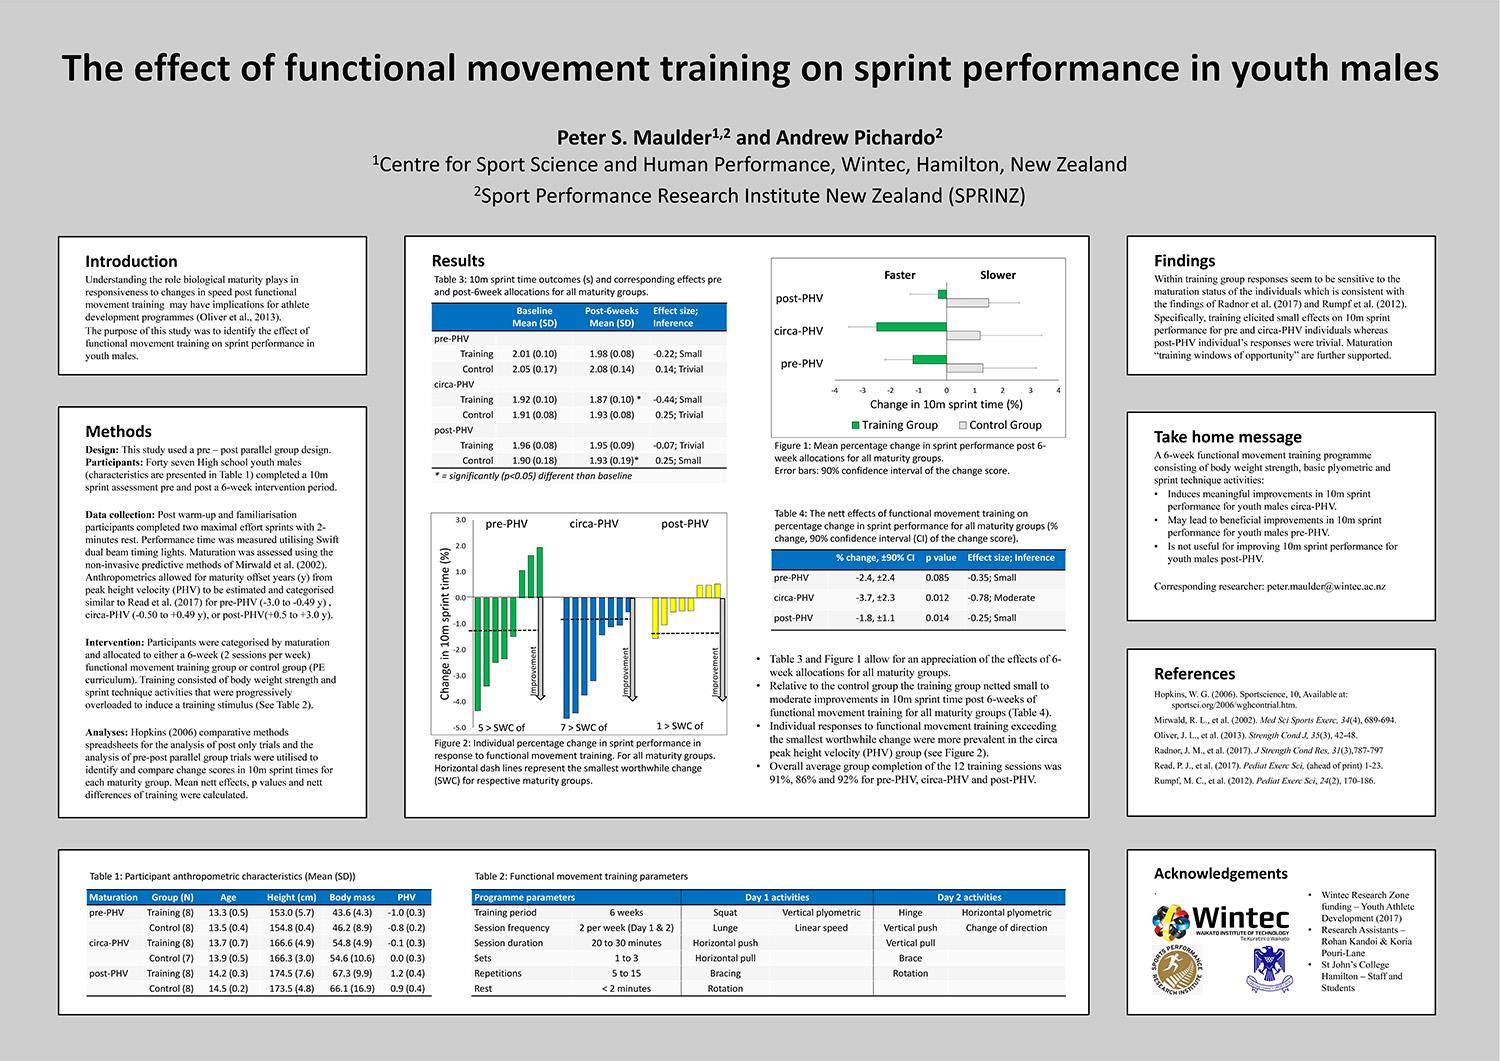 The effect of functional movement training on sprint performance in youth males